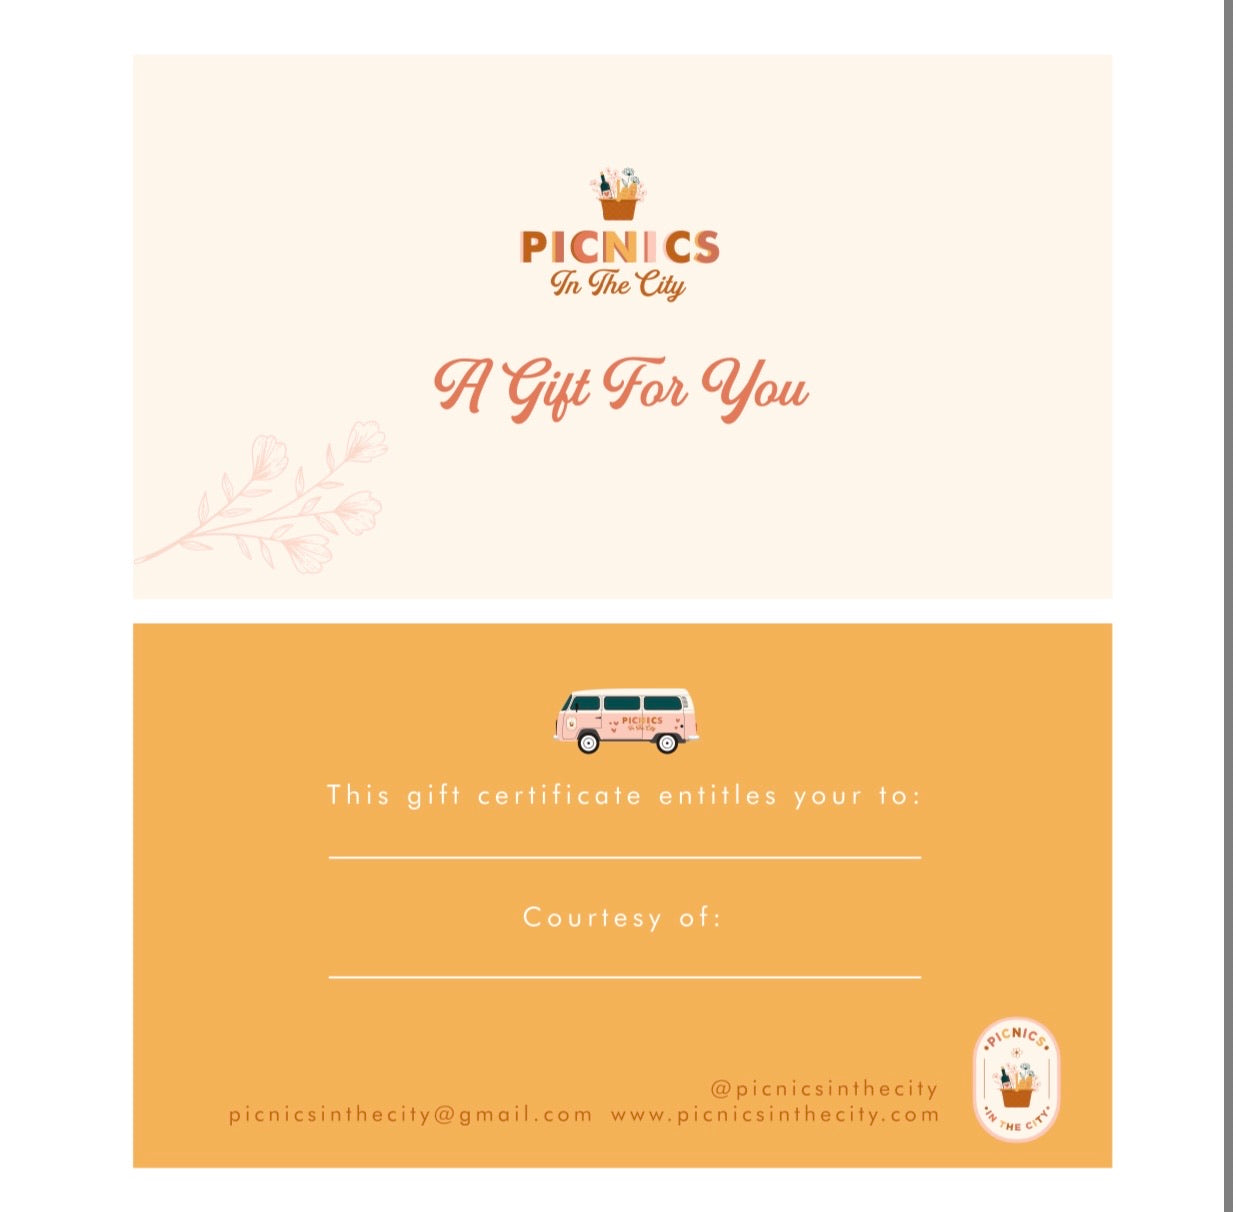 Picnics in the City Gift Card